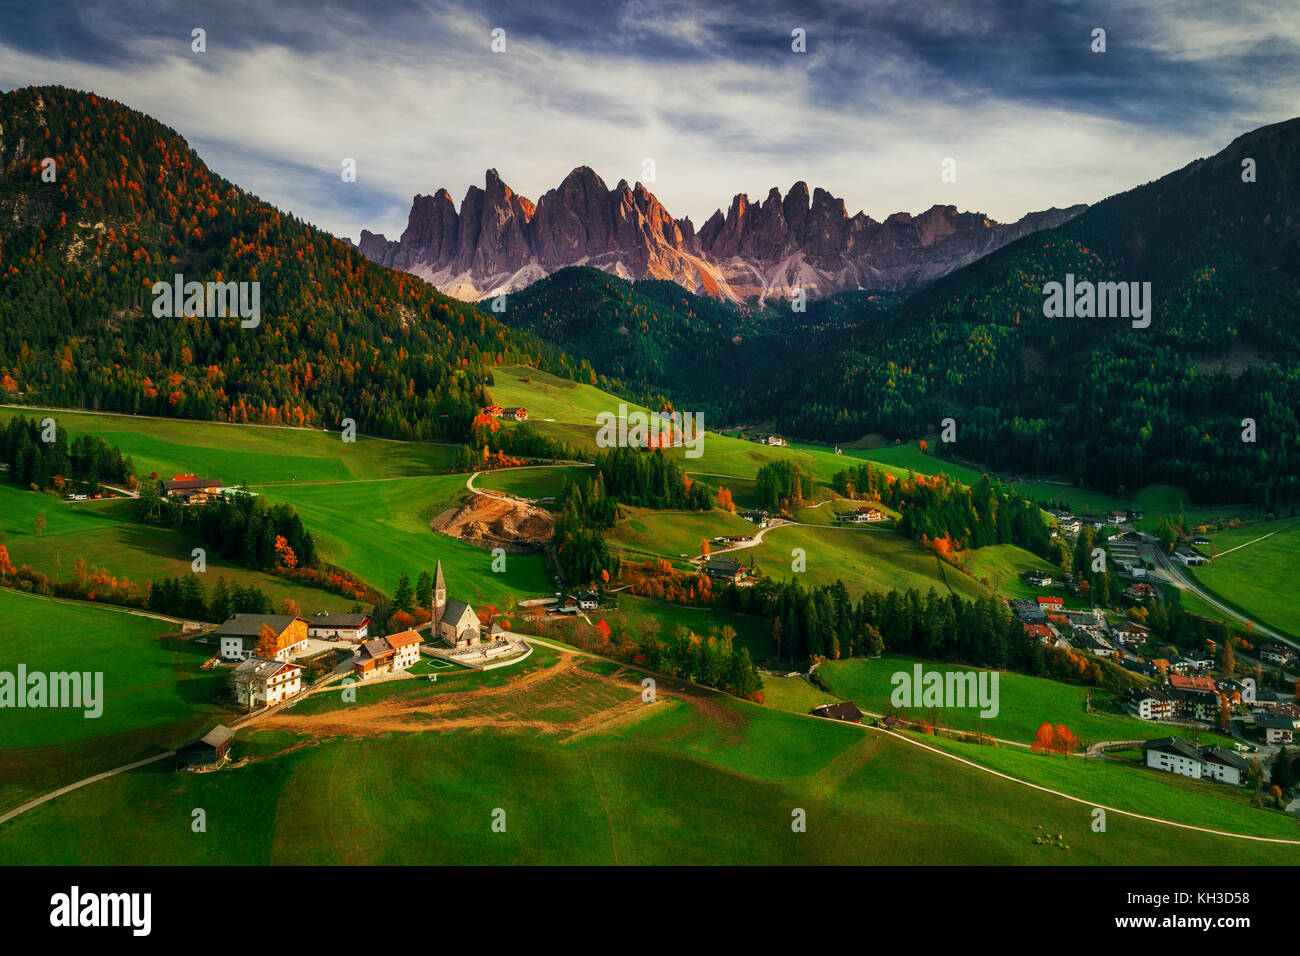 Santa Maddalena village in front of the Geisler or Odle Dolomites Group, Val di Funes, Trentino Alto Adige, Italy, Europe. Stock Photo